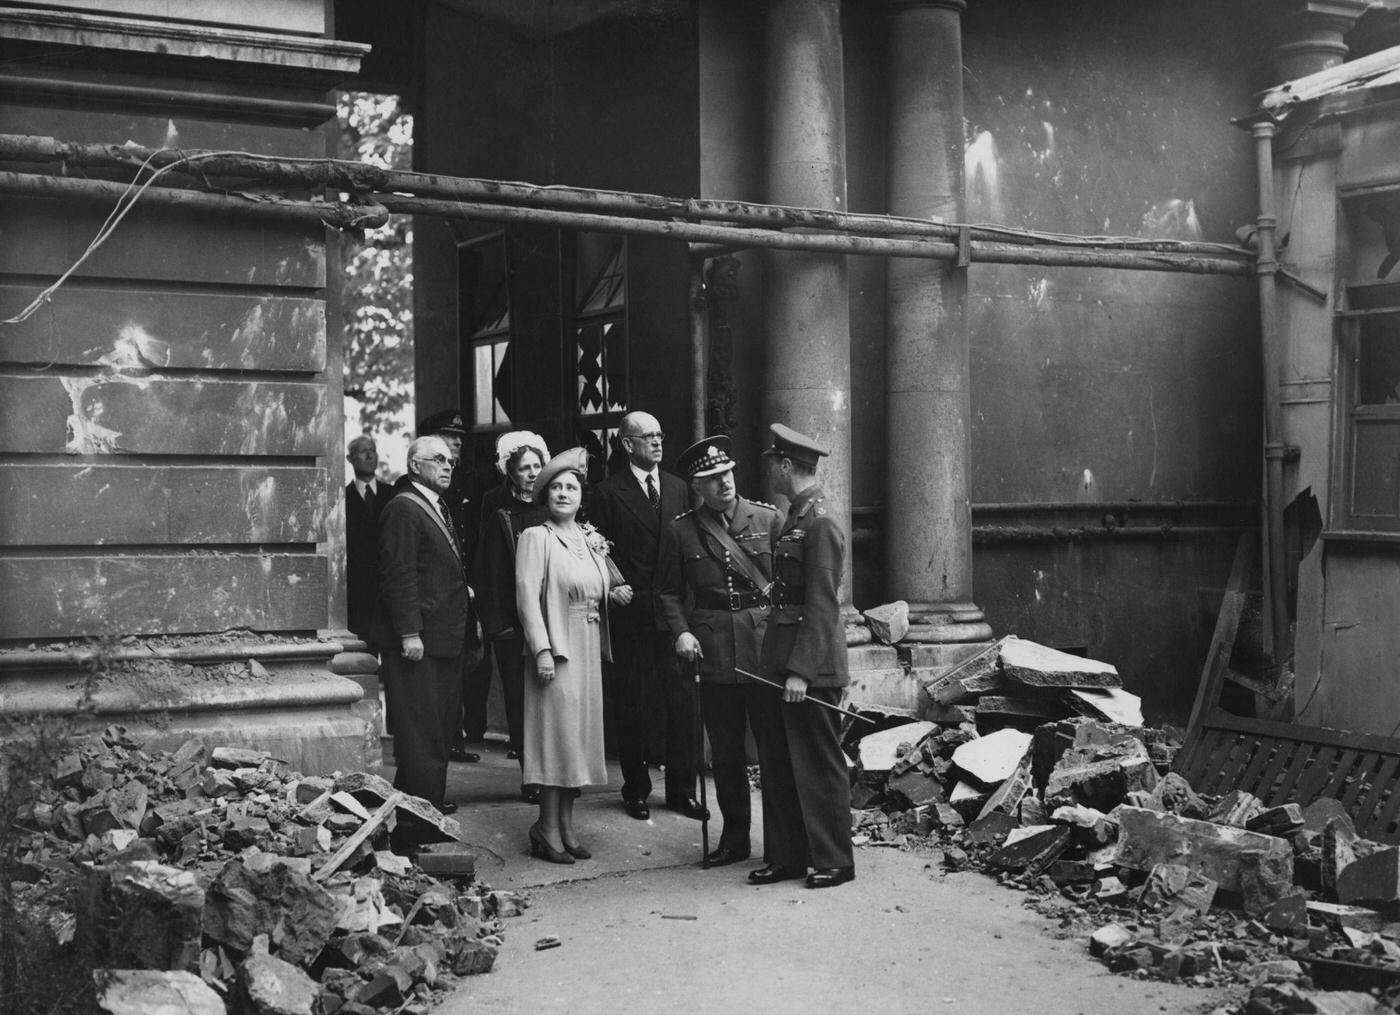 King George VI and Queen Elizabeth inspecting air-raid damage at St. Thomas' Hospital during the Blitz, London, September 1940.